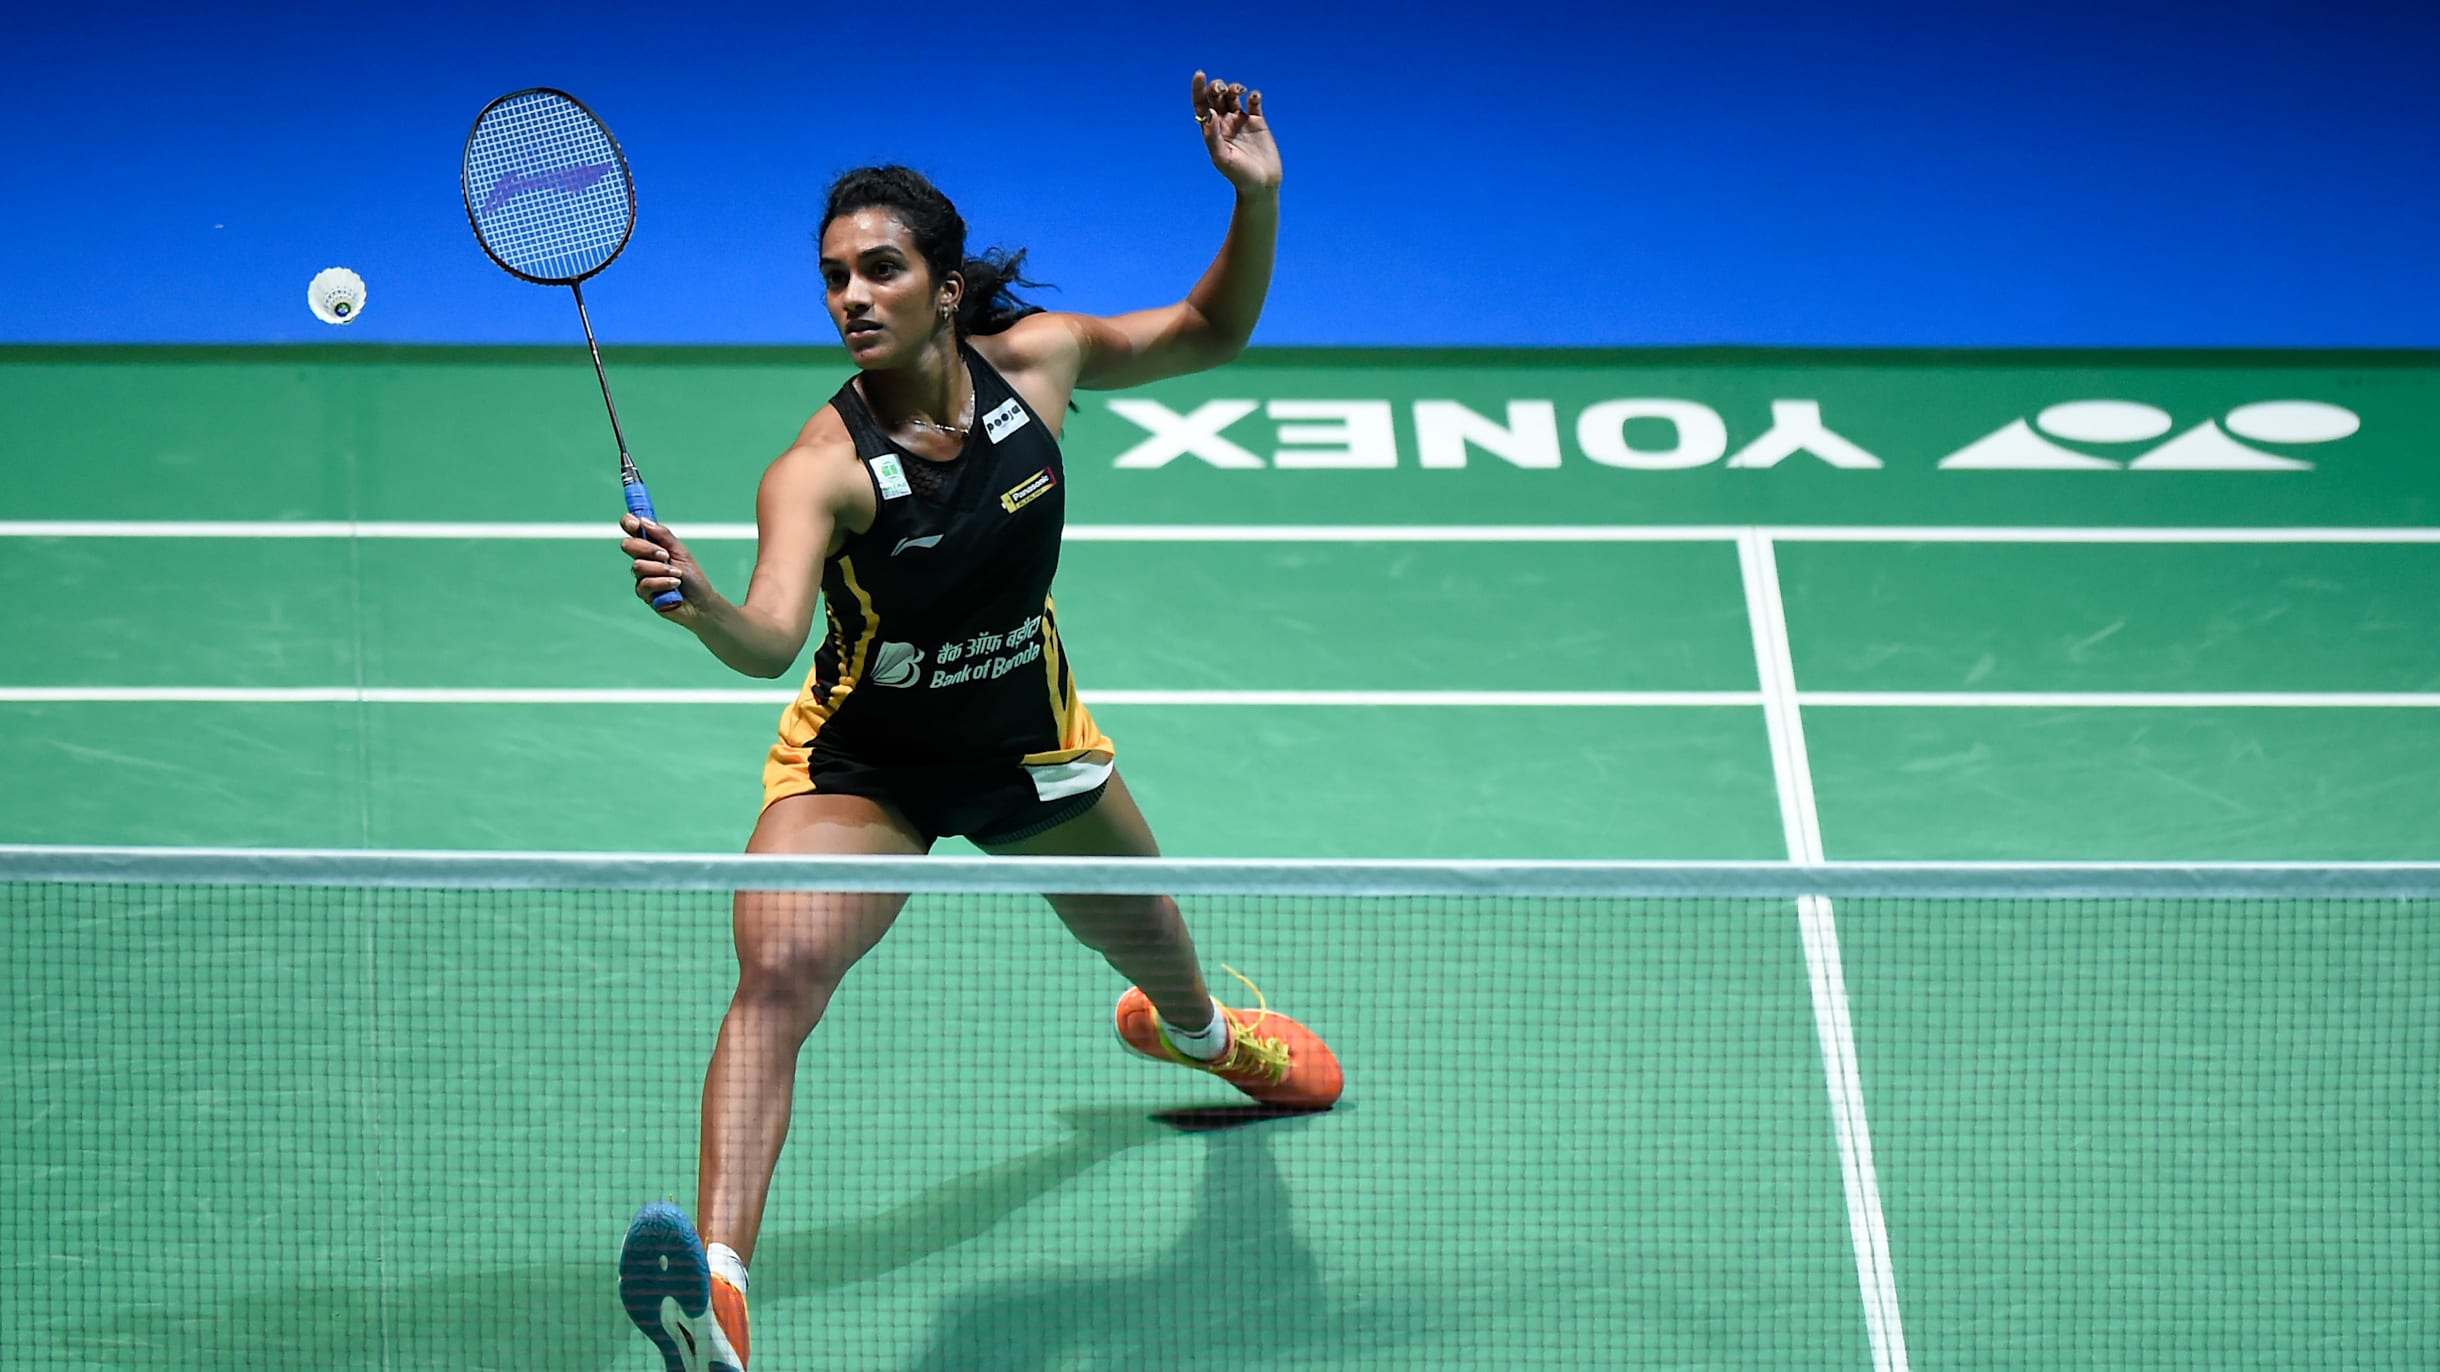 Swiss Open 2021 badminton draw Get full schedule for PV Sindhu, Saina Nehwal and other Indian shuttlers